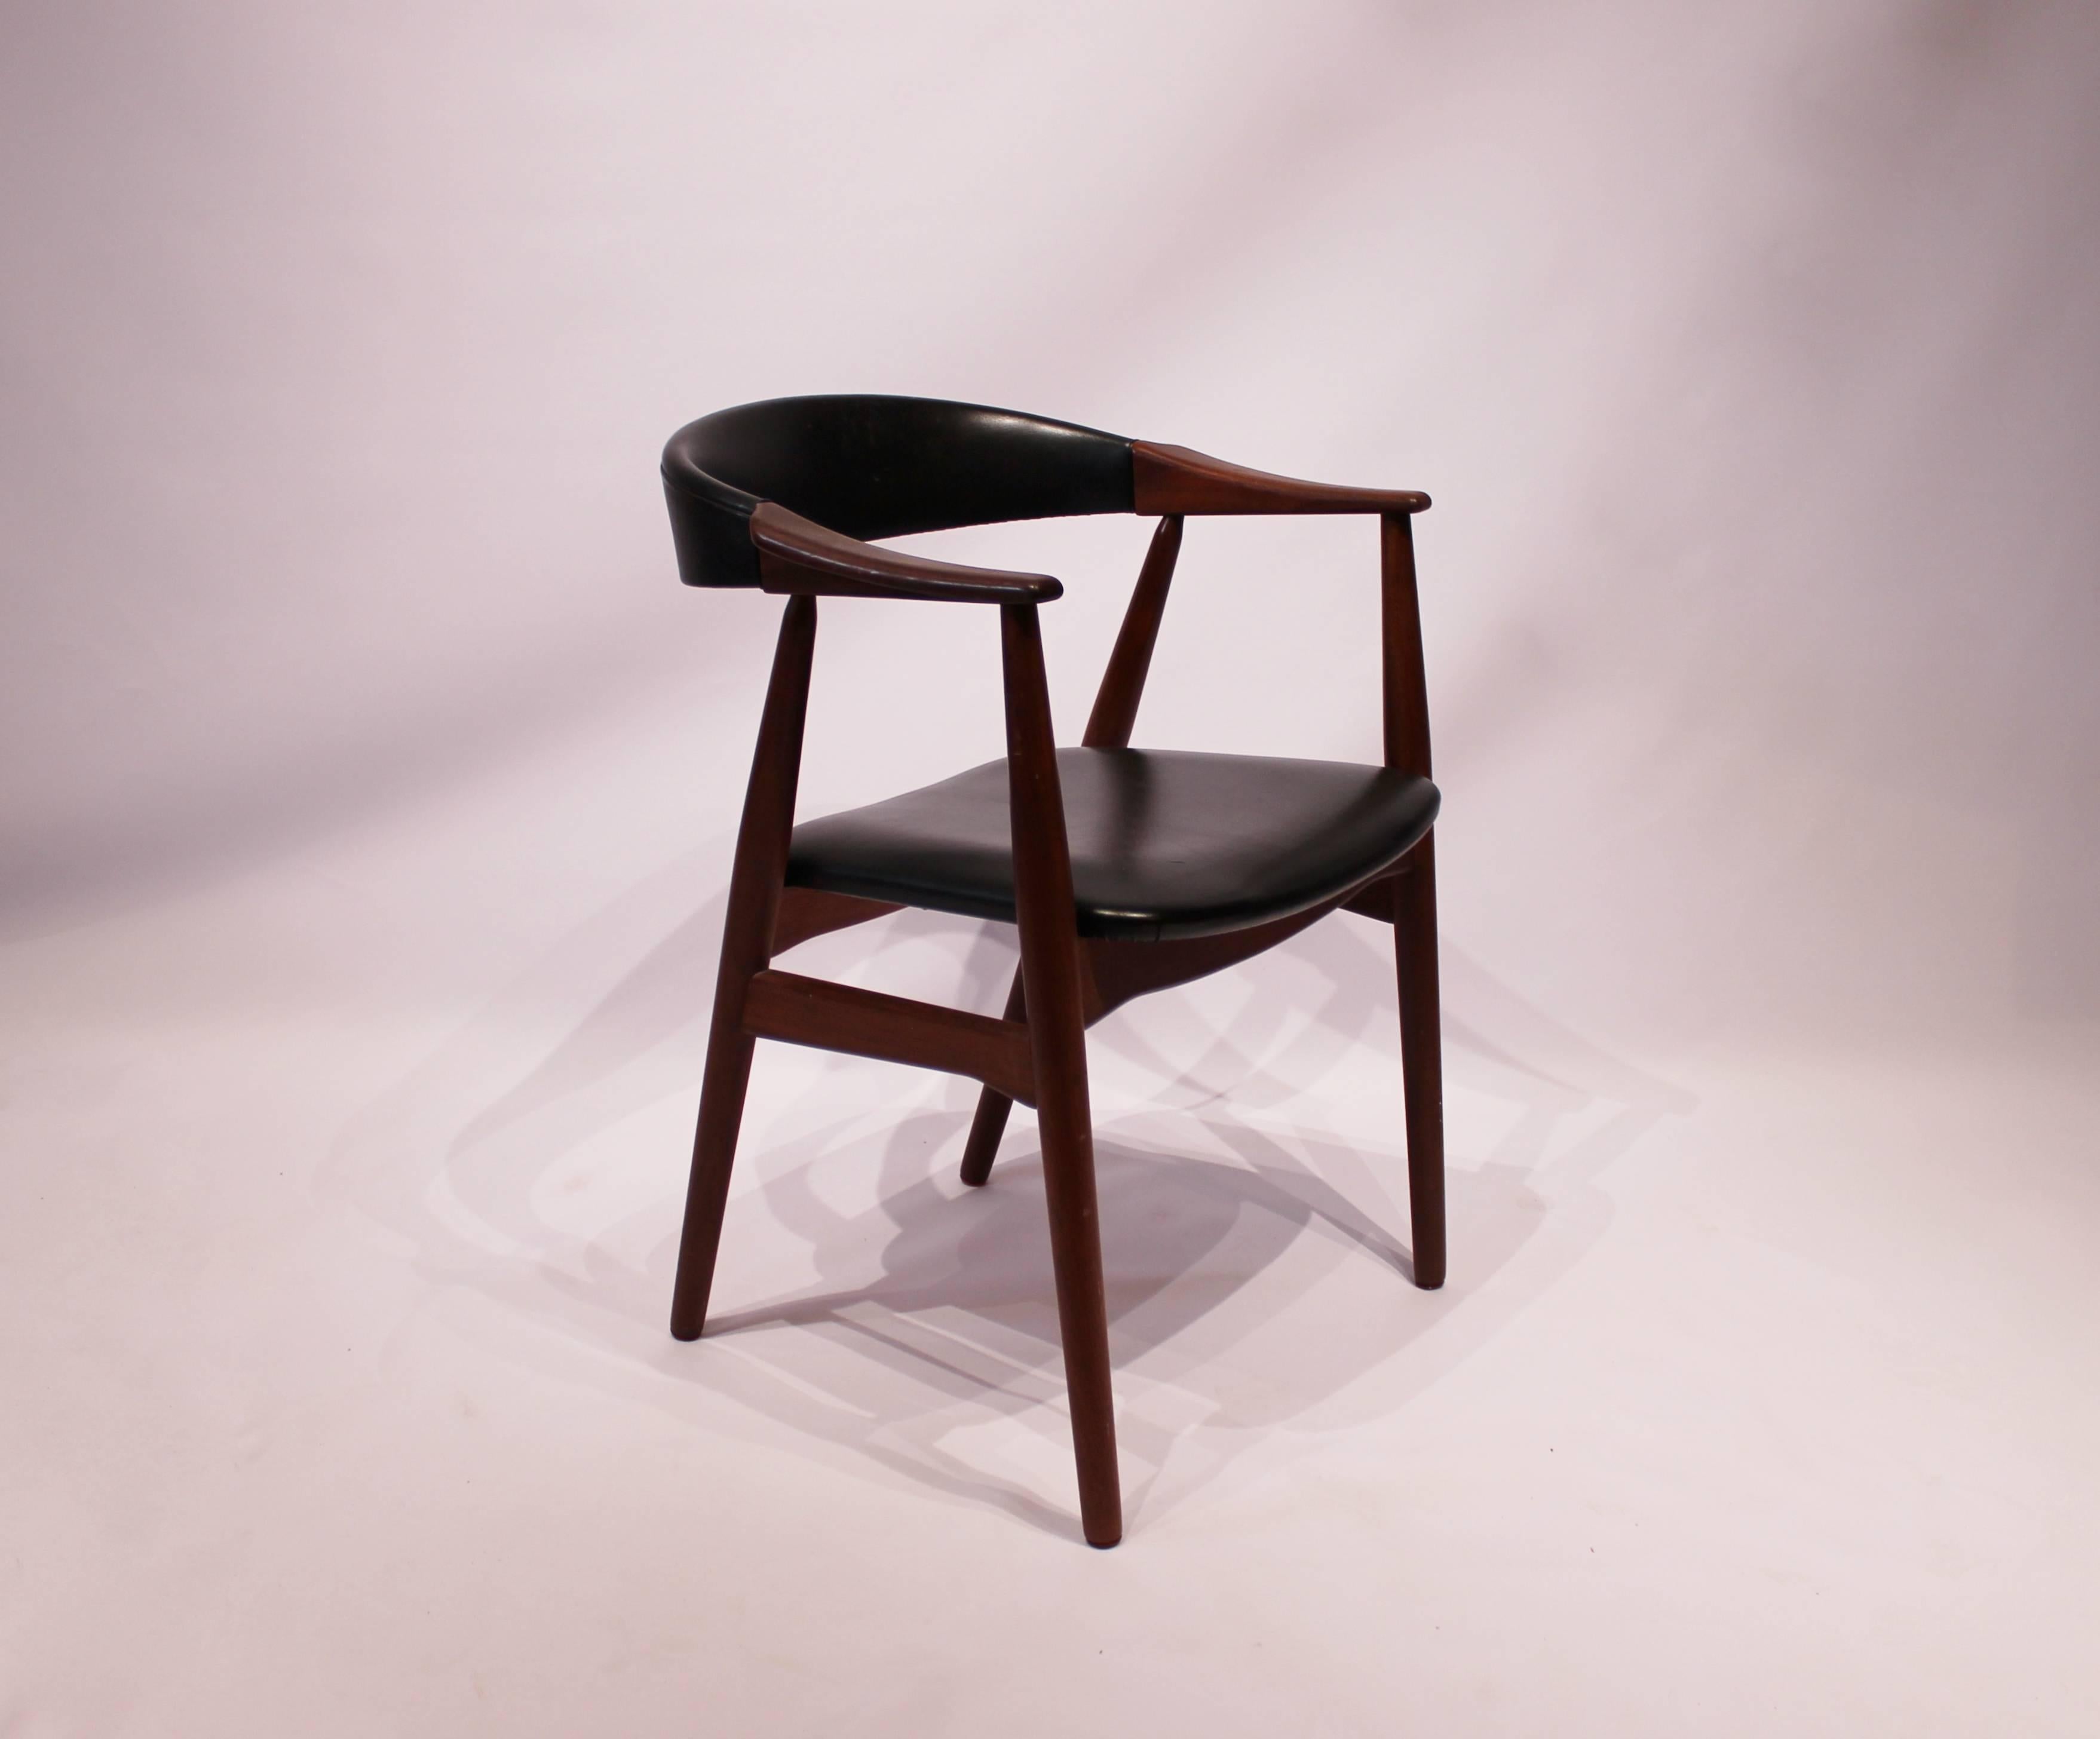 Armchair in teak and black Classic leather of Danish design from the 1960s. The chair is in great vintage condition.